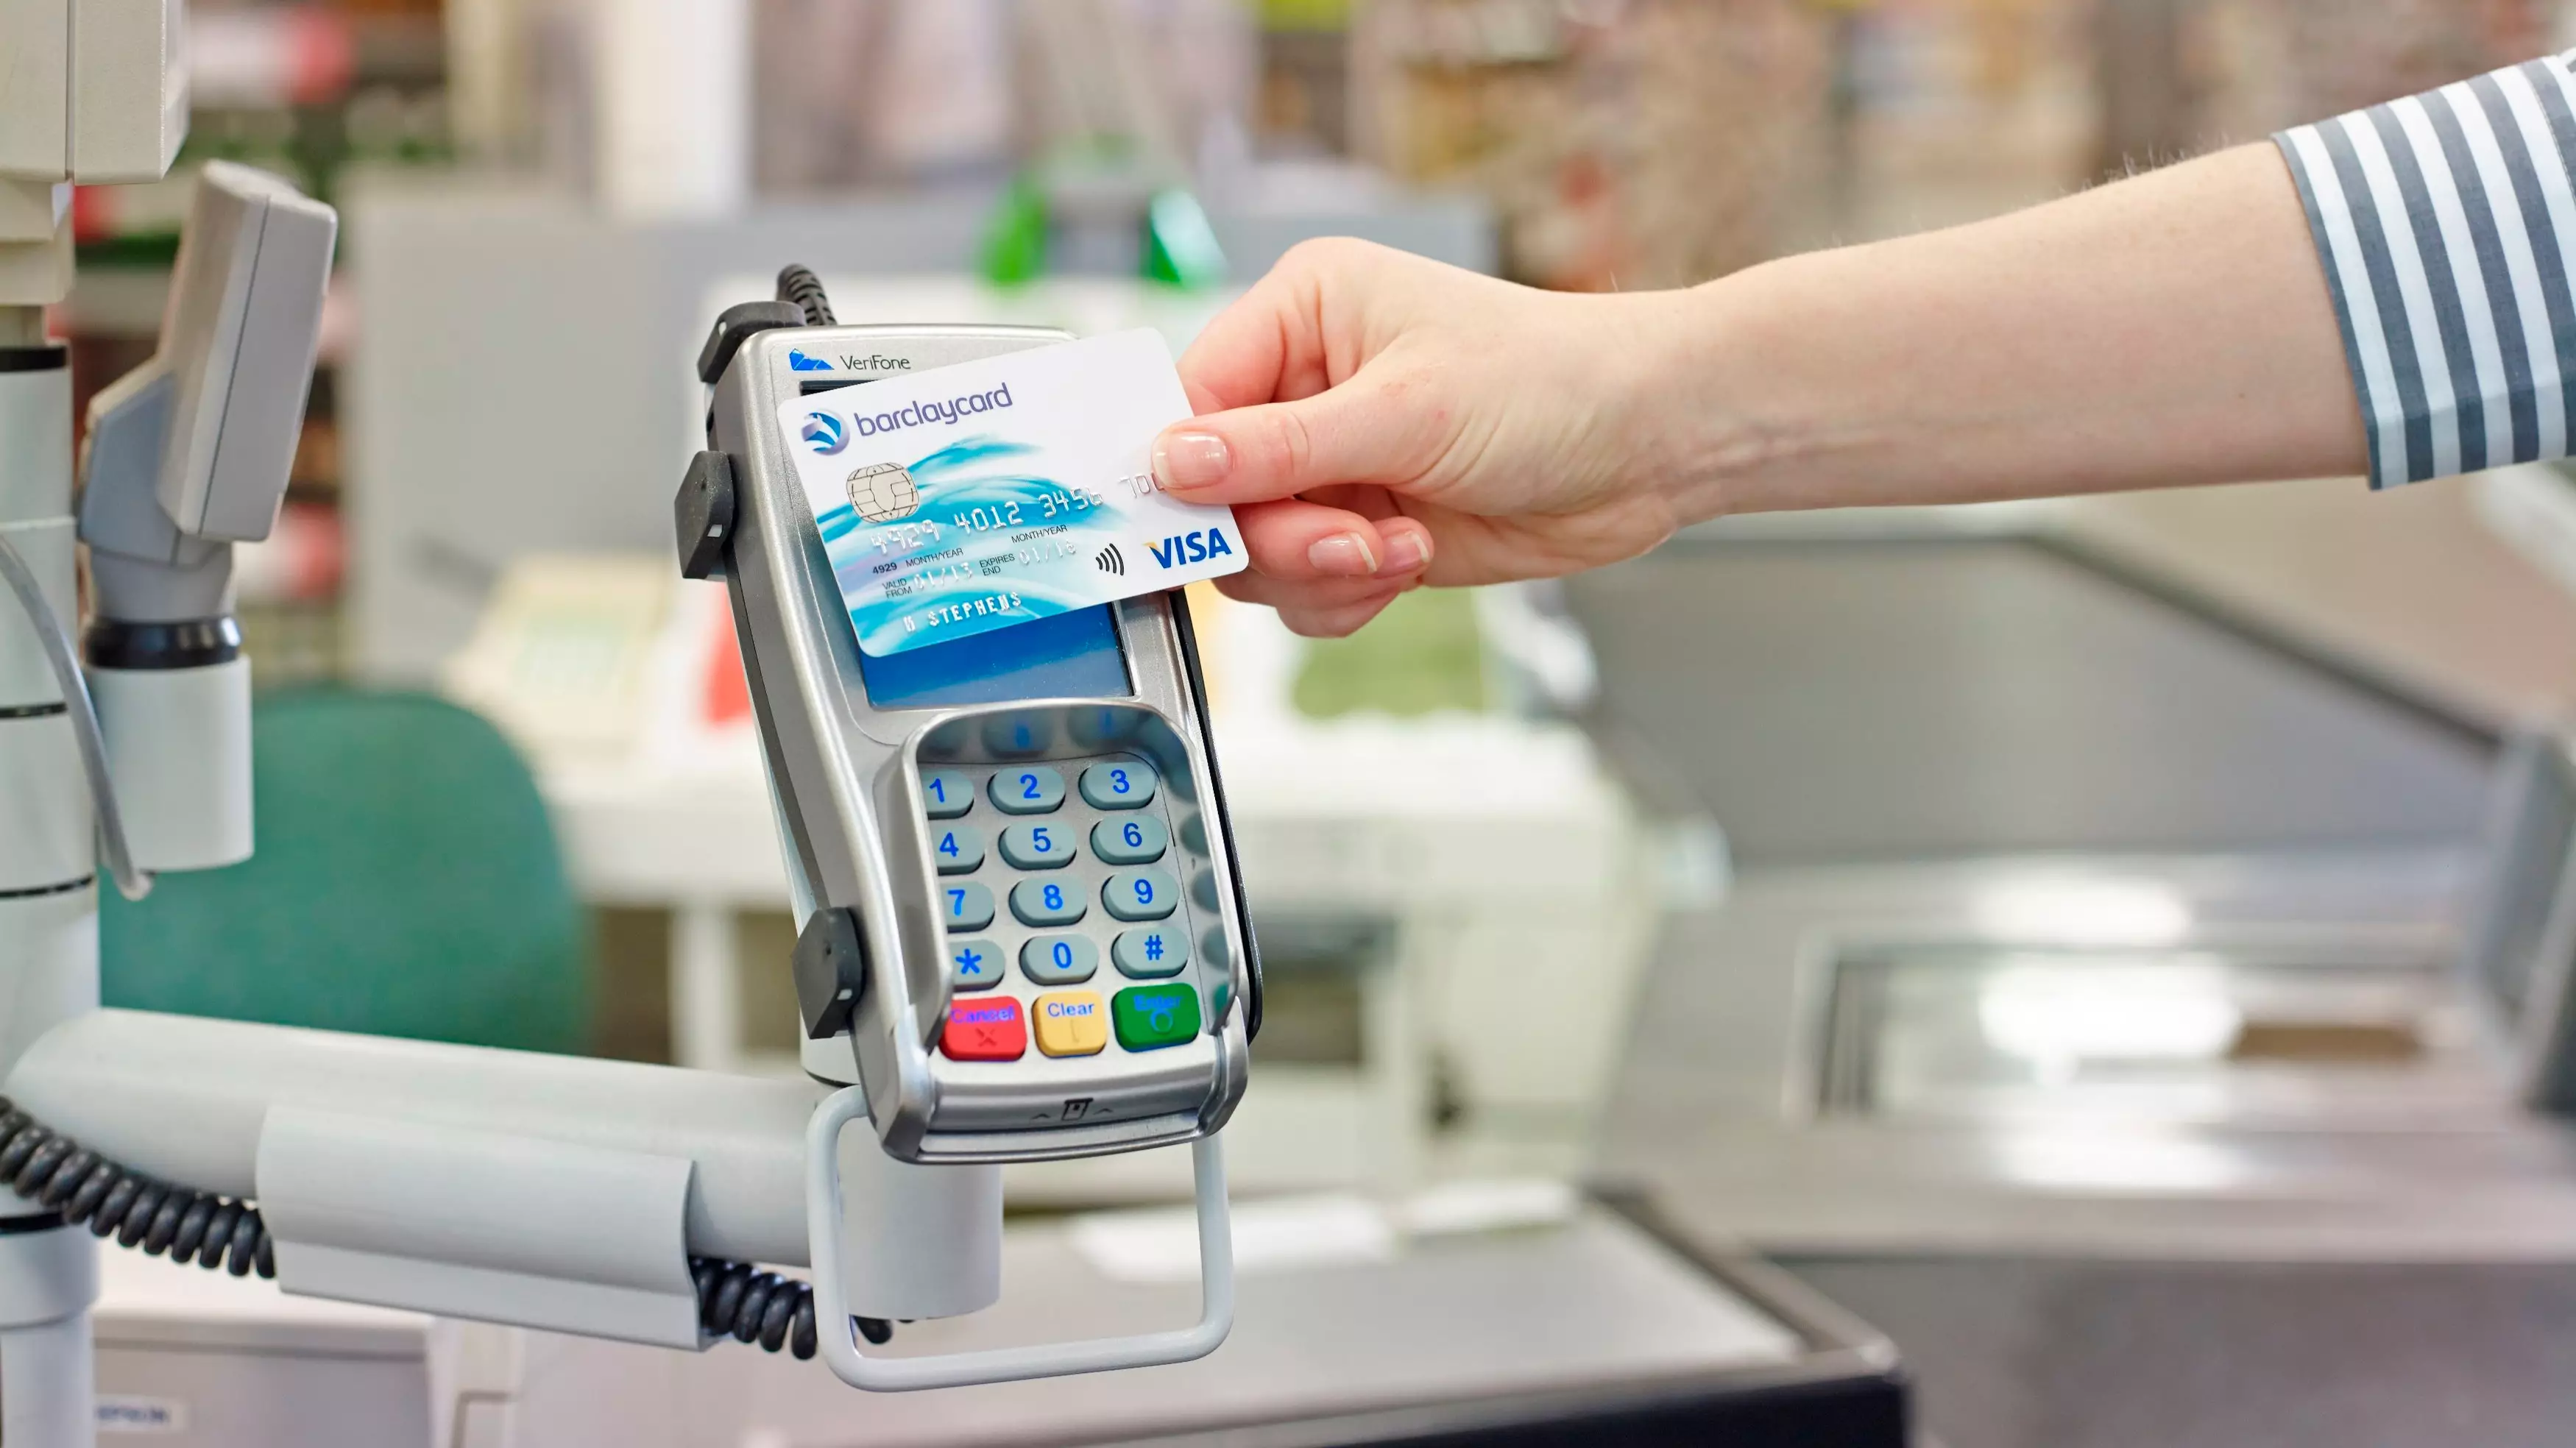 UK Contactless Card Spend Limit Increases From £30 To £45 Today